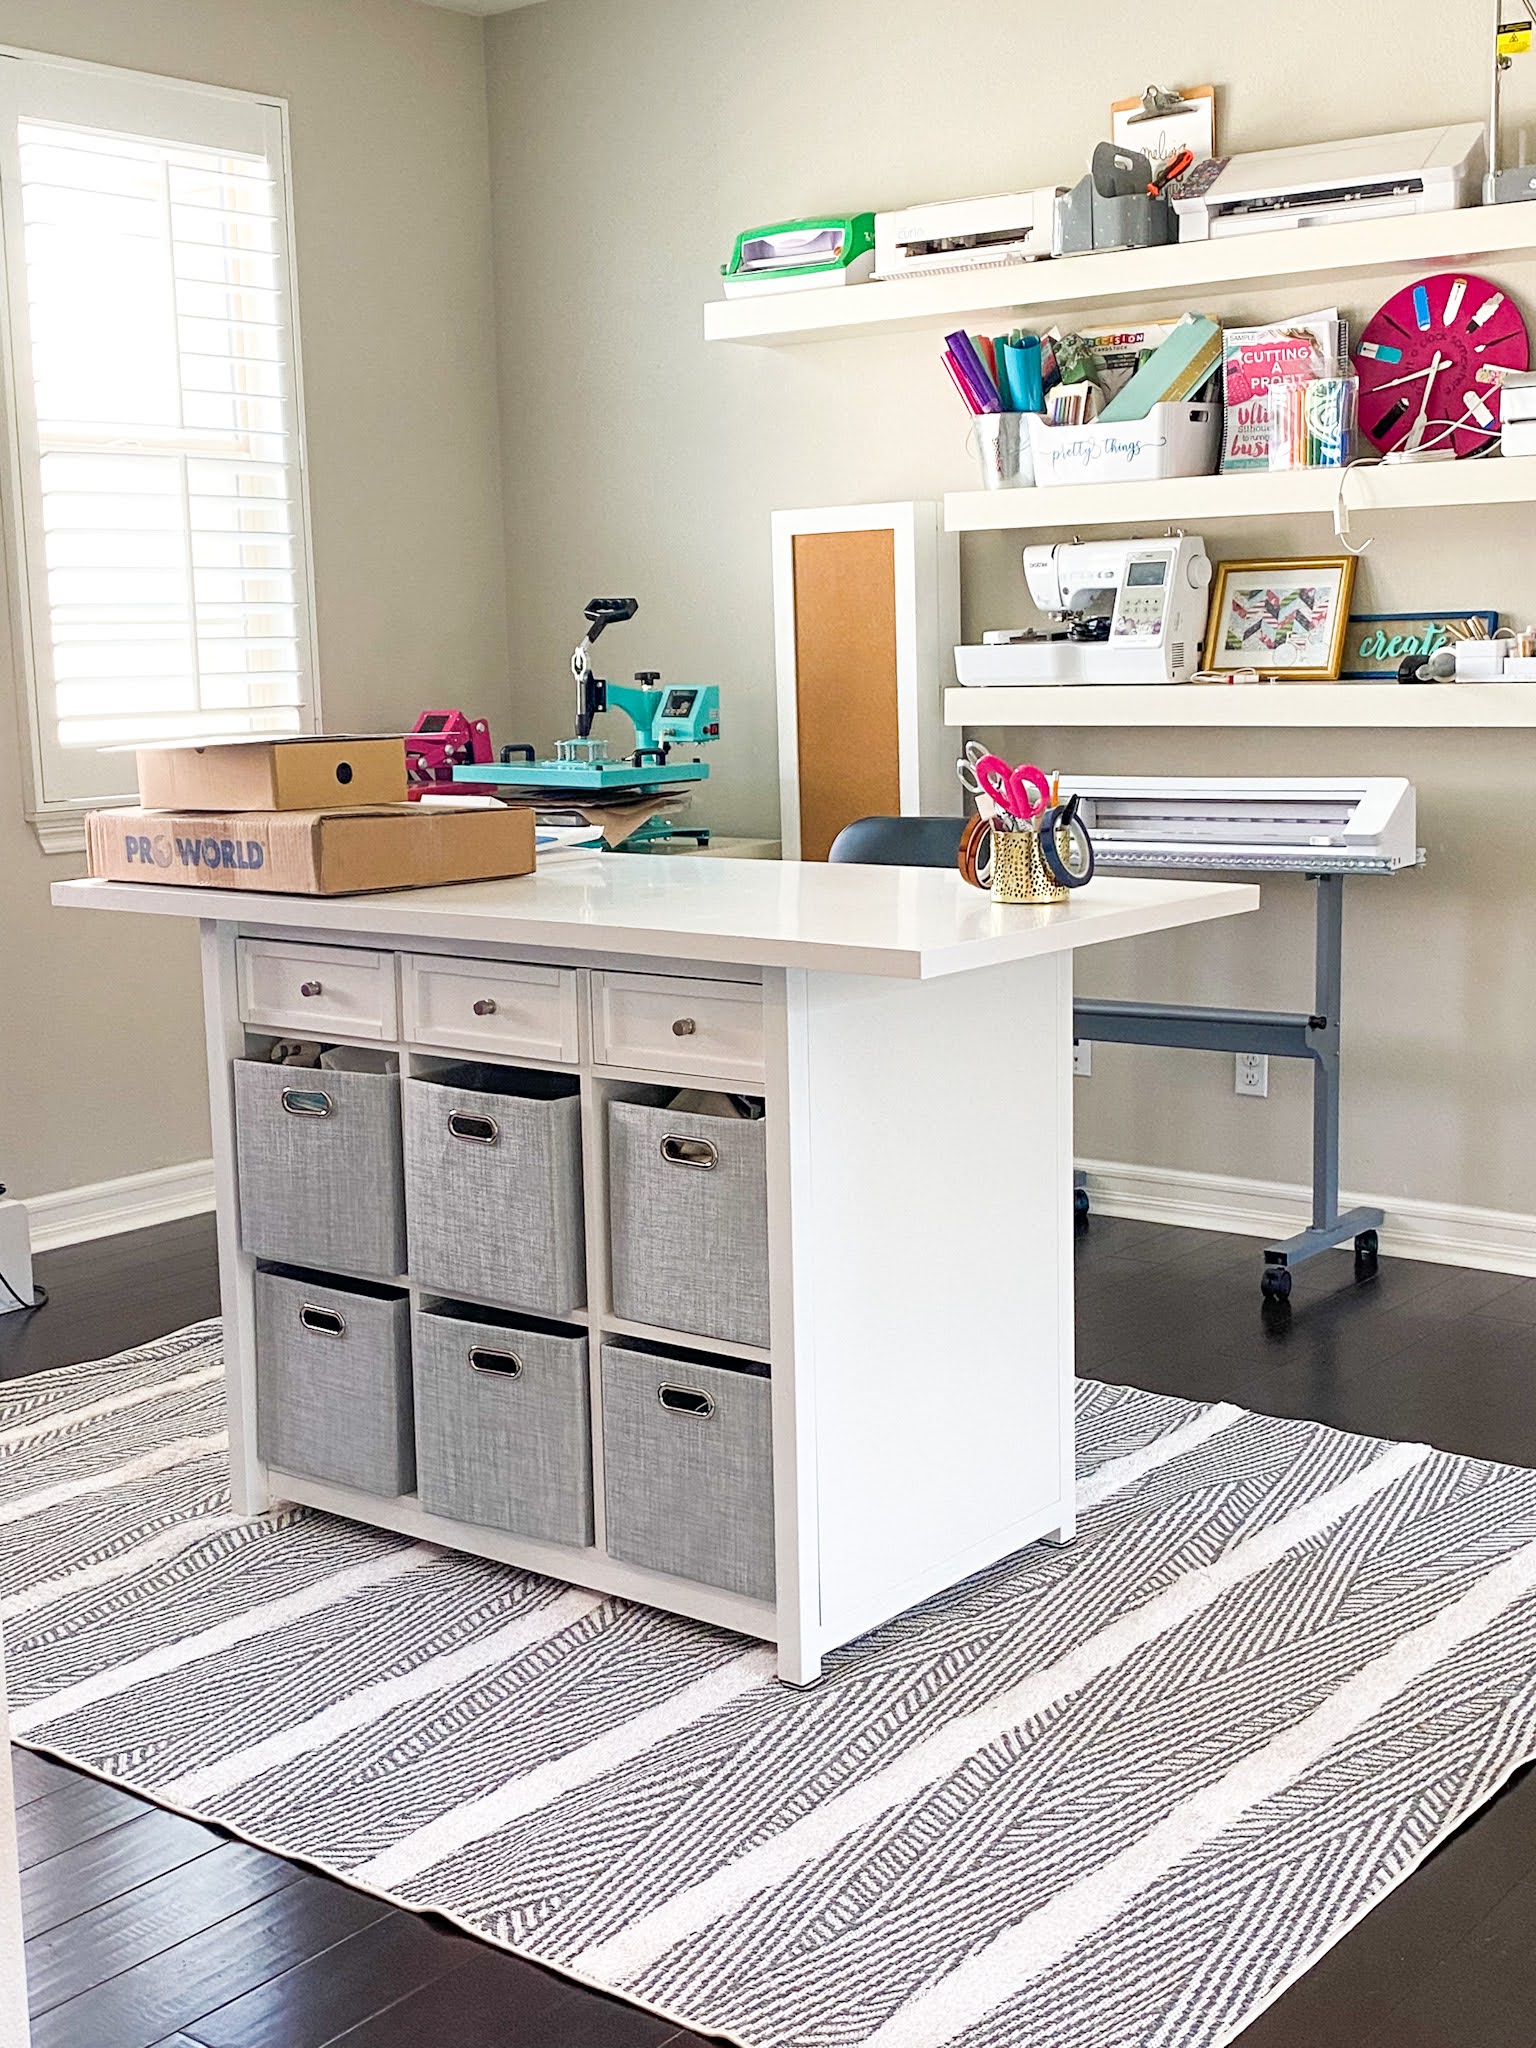 Where can I buy a large island/table with storage for my crafts room?